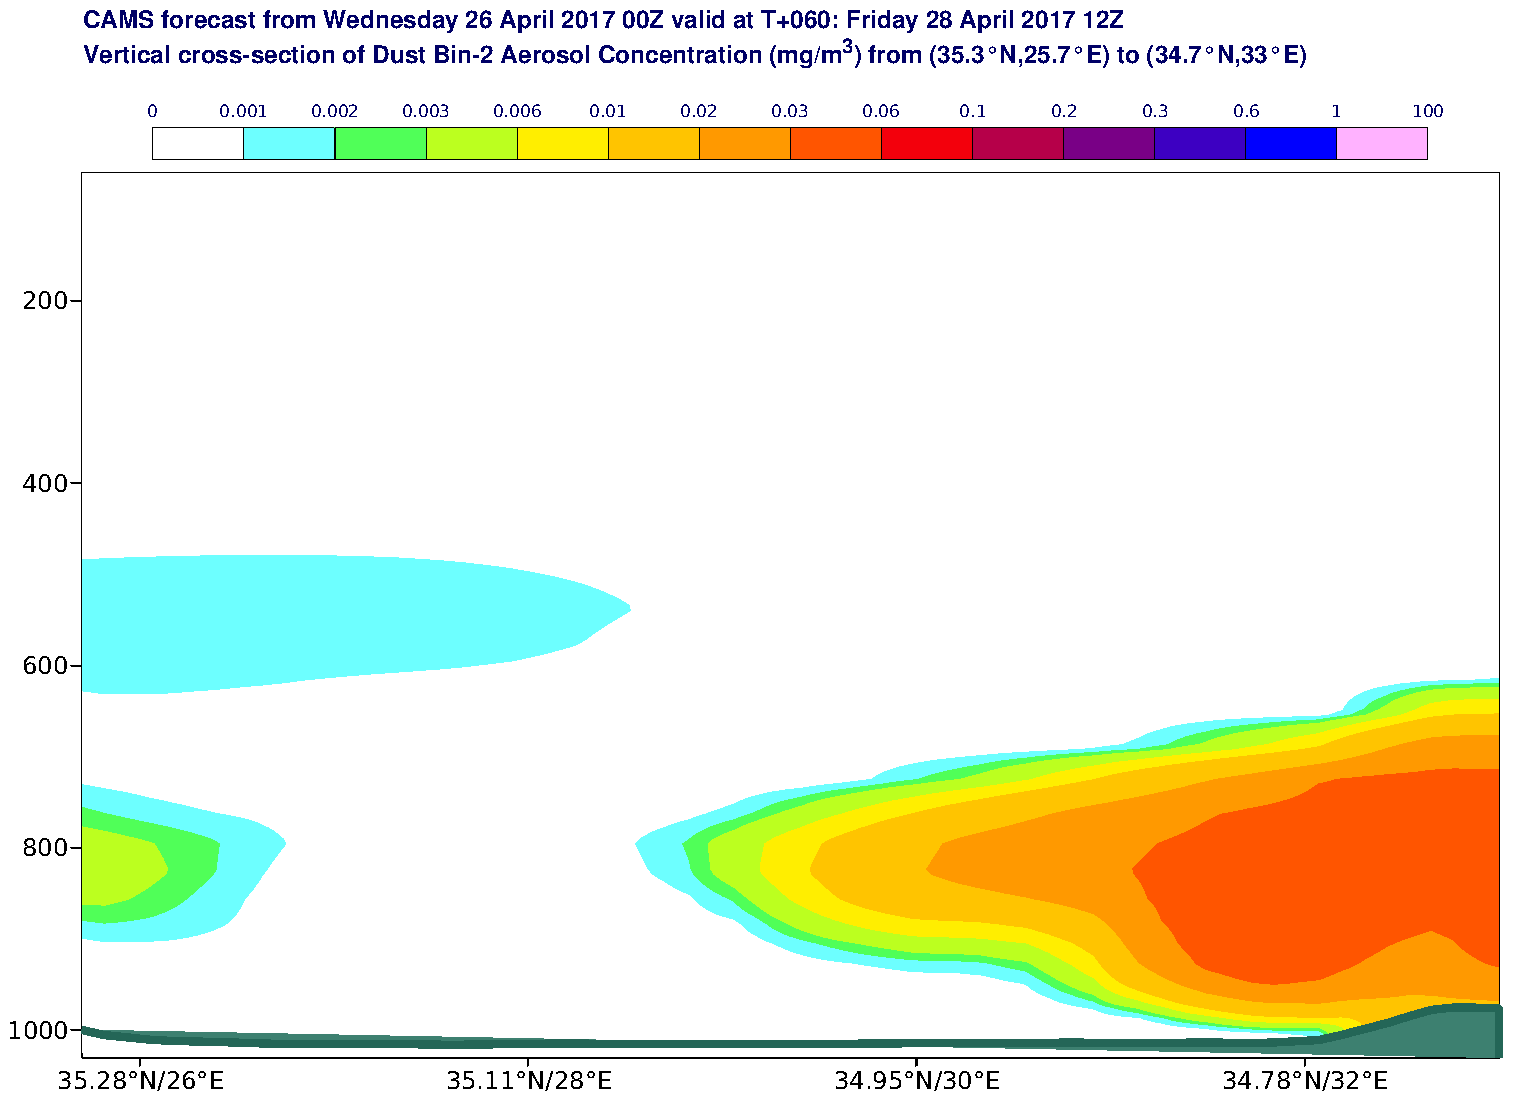 Vertical cross-section of Dust Bin-2 Aerosol Concentration (mg/m3) valid at T60 - 2017-04-28 12:00